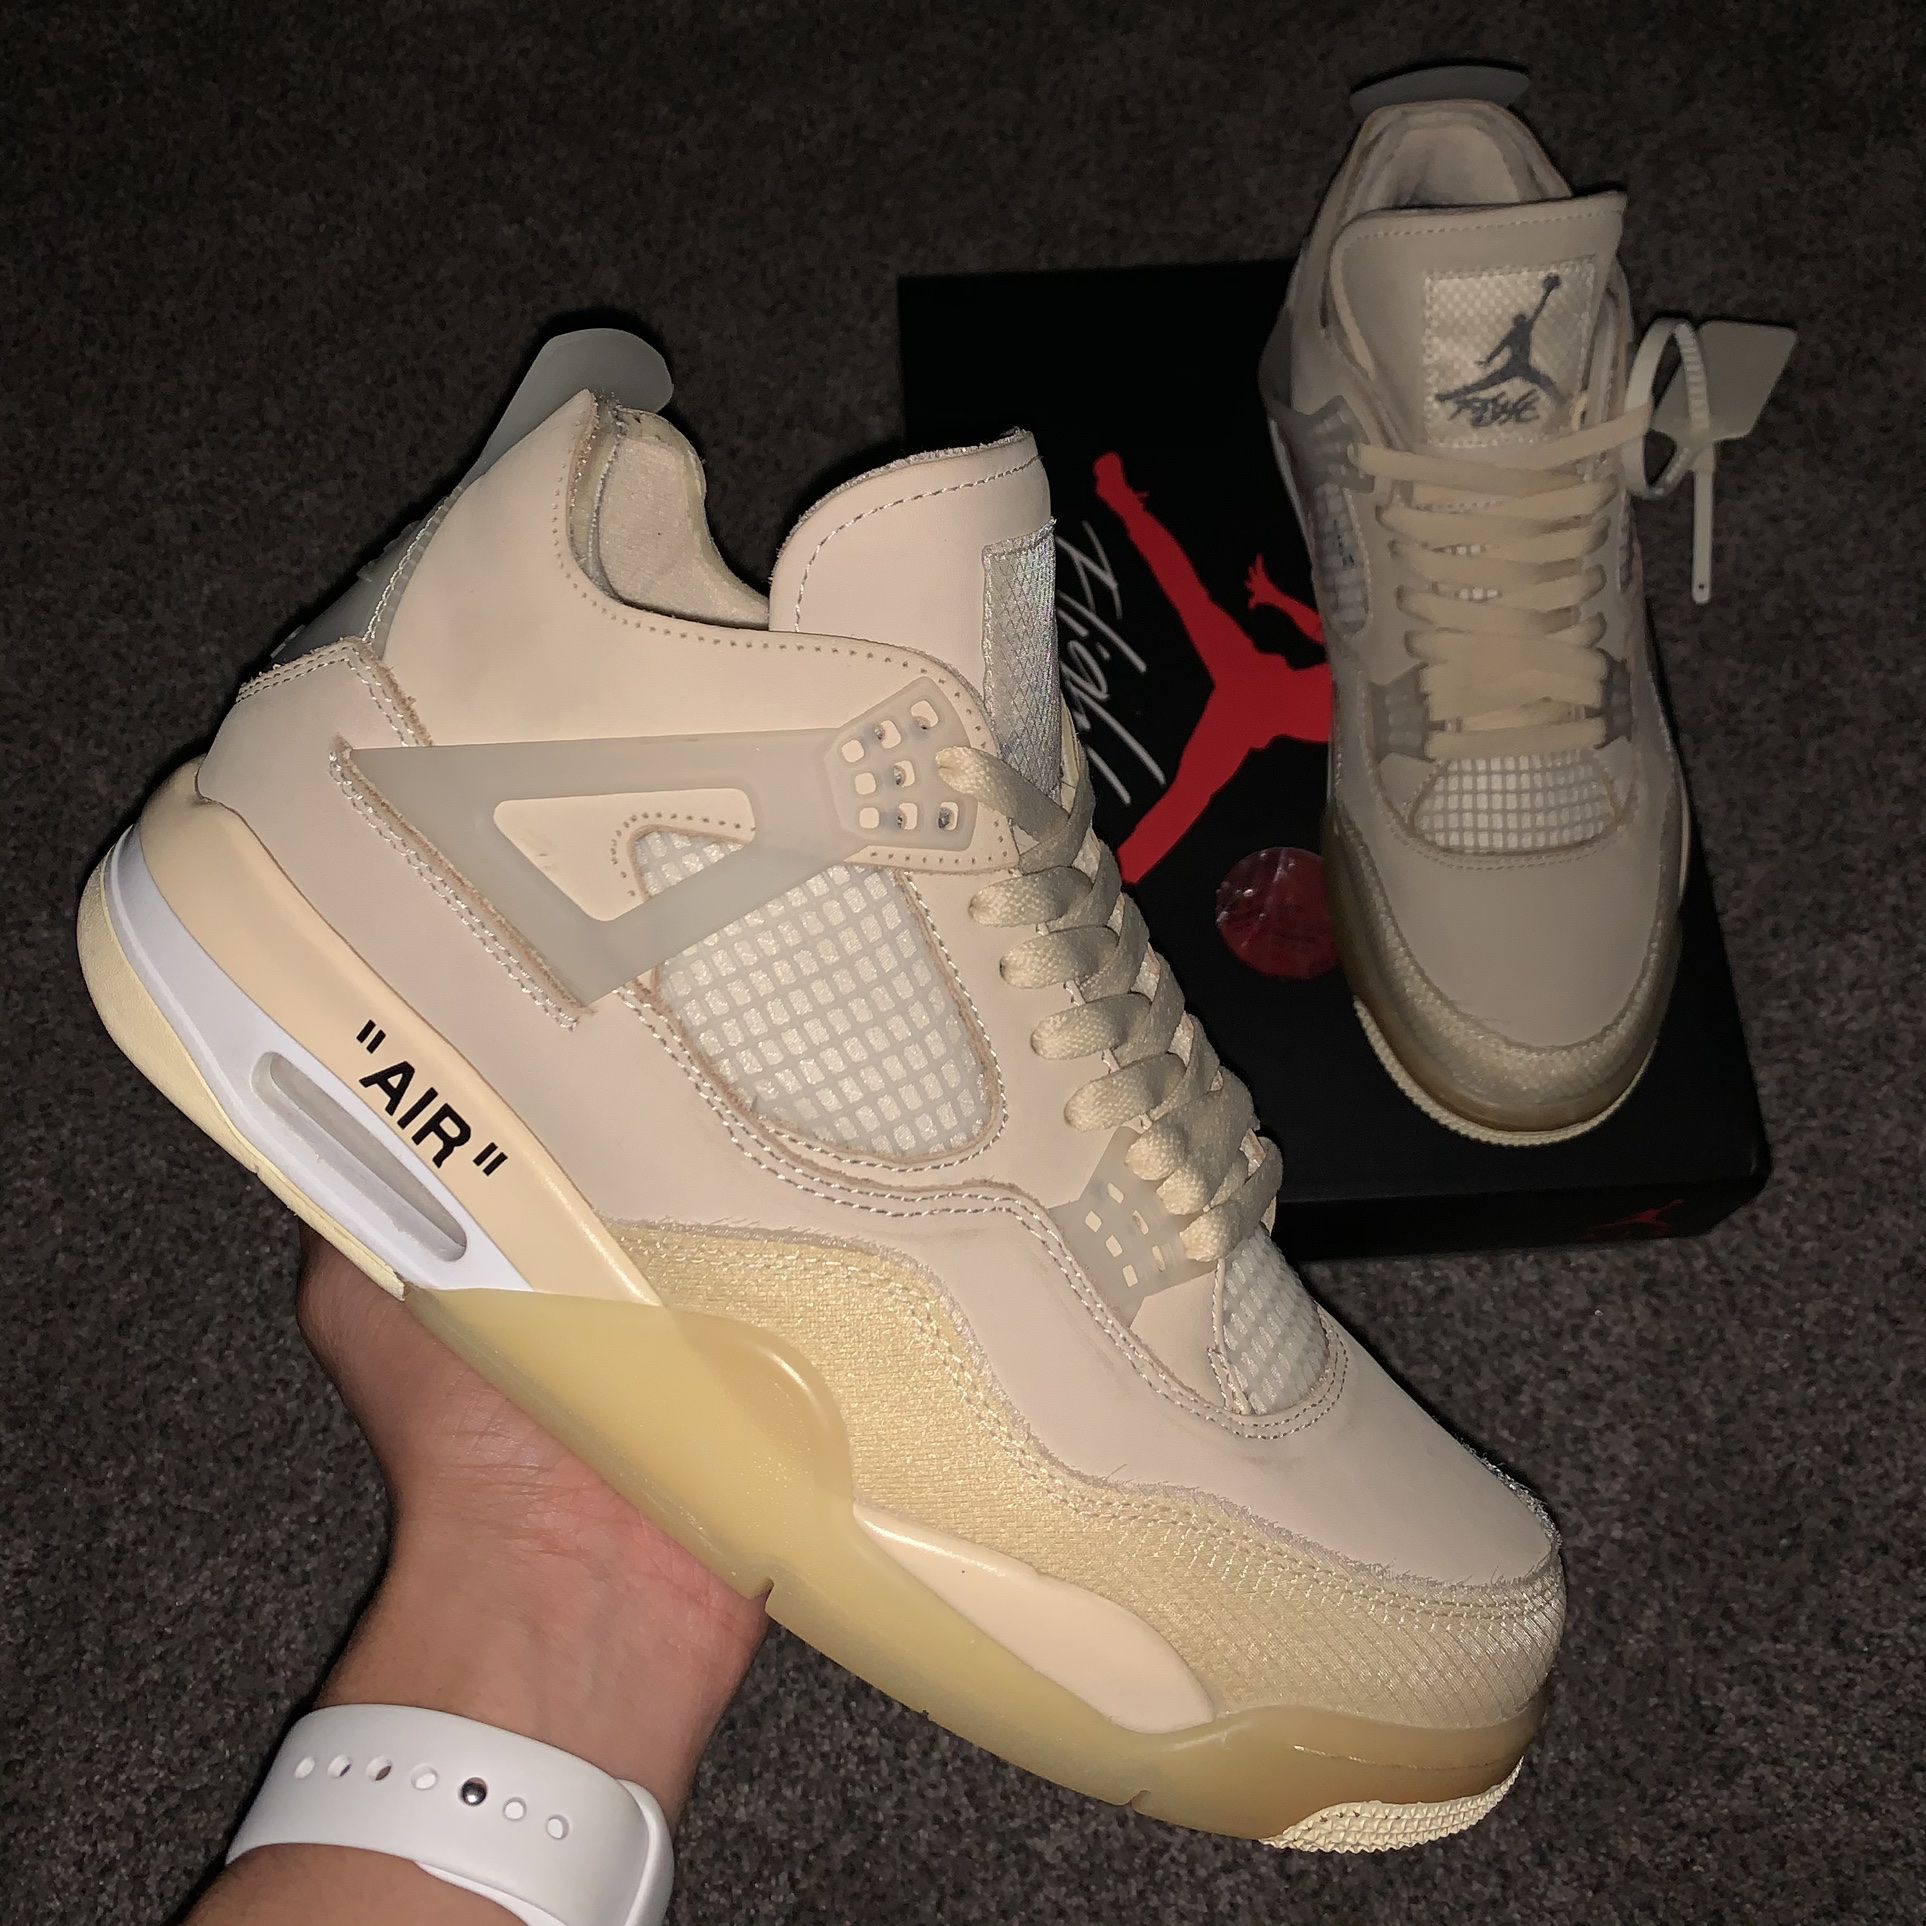 Jordan 4 Retro Off-White “sail” Women’s sneaker - size 13 Condition: VNDS tried on 1x (No star loss) 🌟